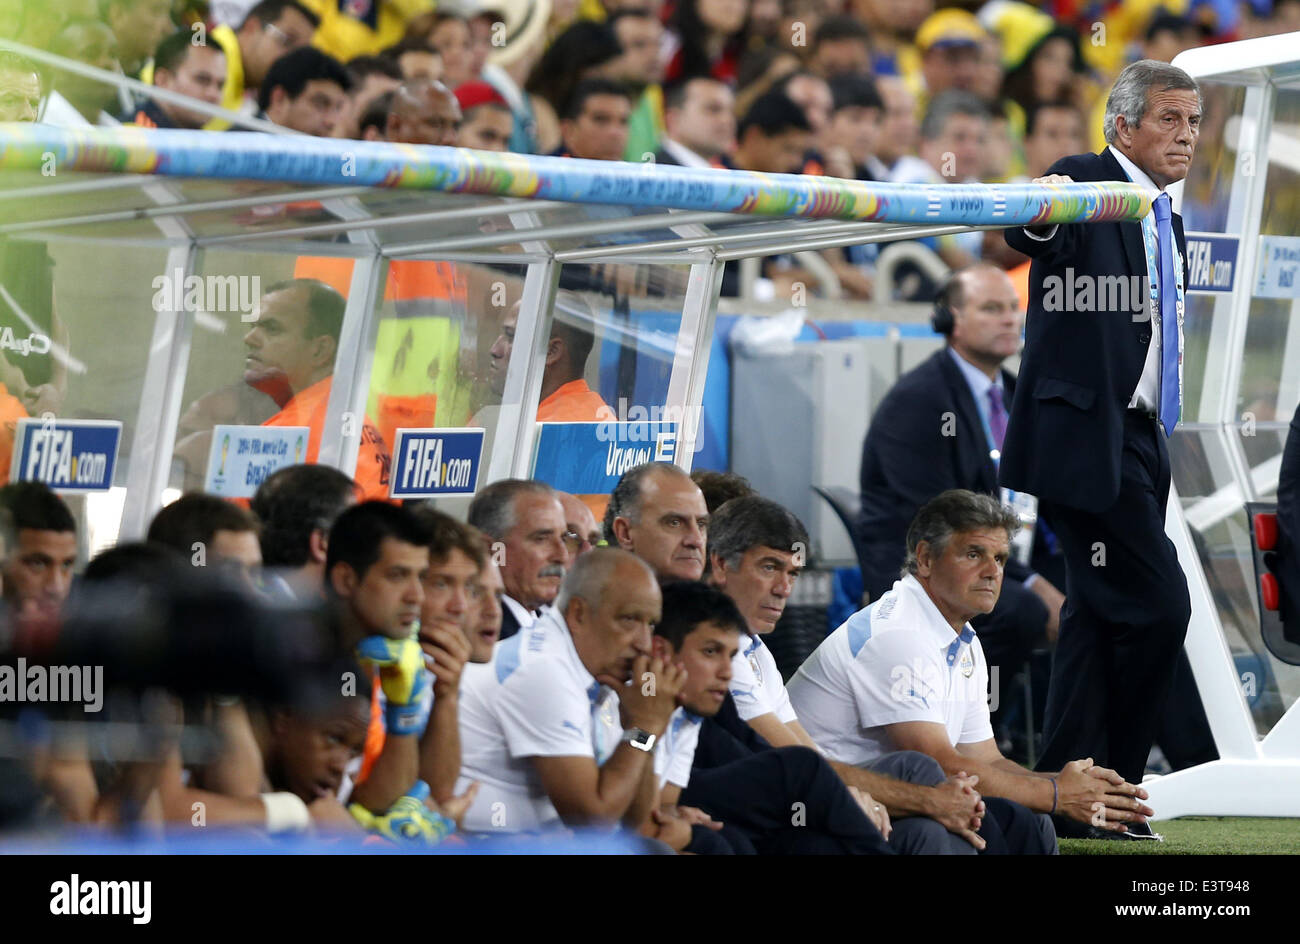 Rio De Janeiro, Brazil. 28th June, 2014. Uruguay's coach Oscar Washington Tabarez (1st R) looks on during a Round of 16 match between Colombia and Uruguay of 2014 FIFA World Cup at the Estadio do Maracana Stadium in Rio de Janeiro, Brazil, on June 28, 2014. Colombia won 2-0 over Uruguay and qualified for Quarter-finals on Saturday. Credit:  Wang Lili/Xinhua/Alamy Live News Stock Photo